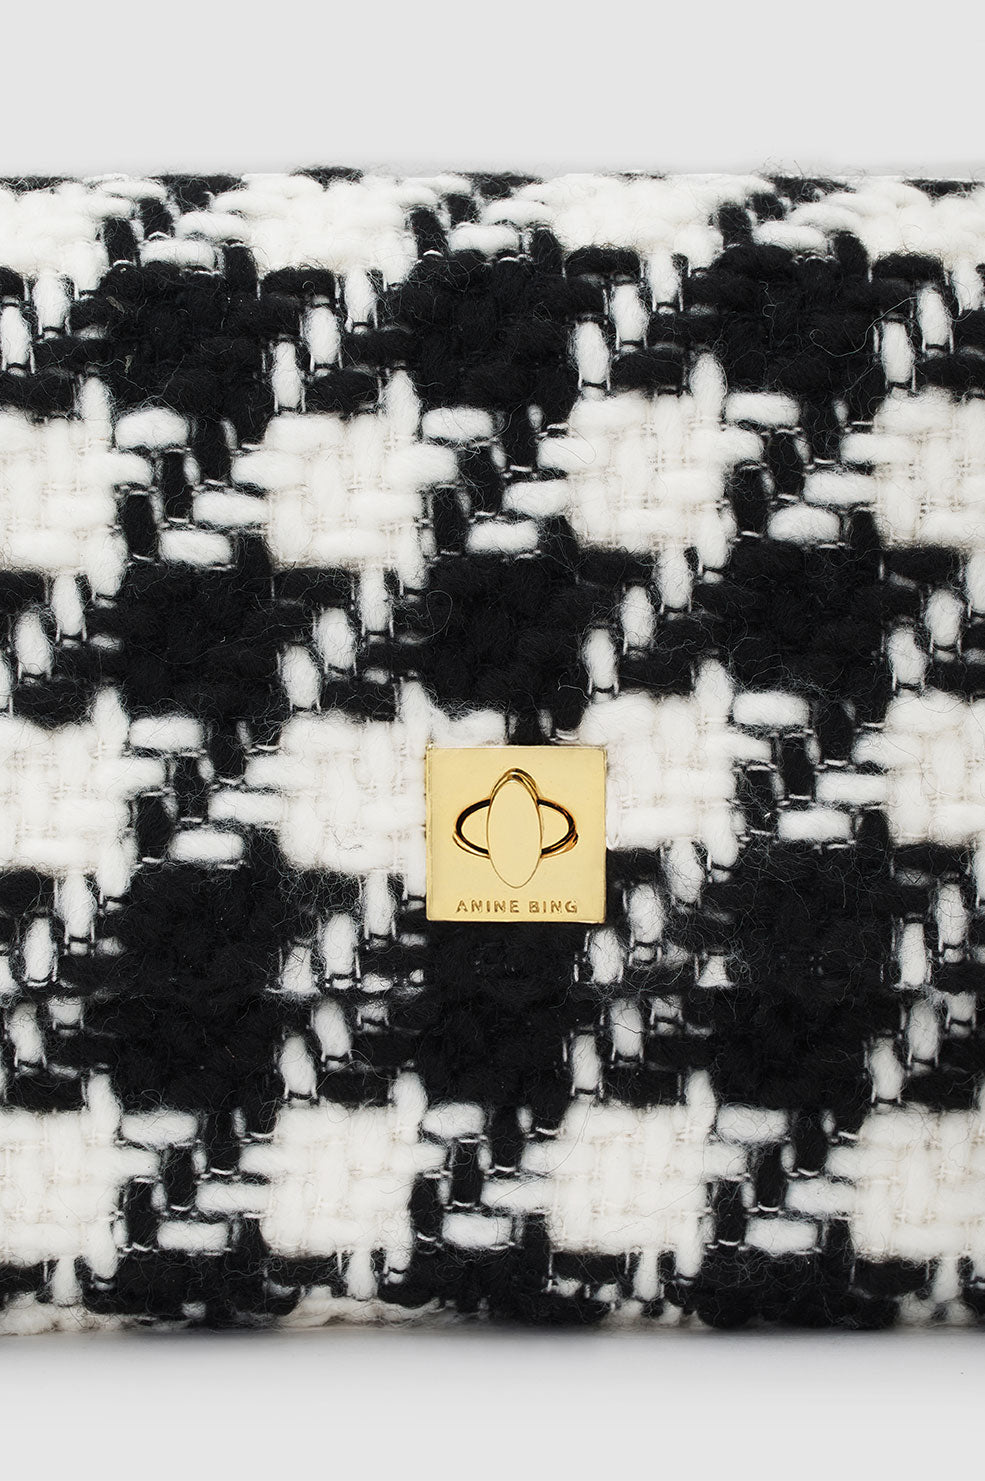 ANINE BING Nico Bag - Black And White Houndstooth - Detail View